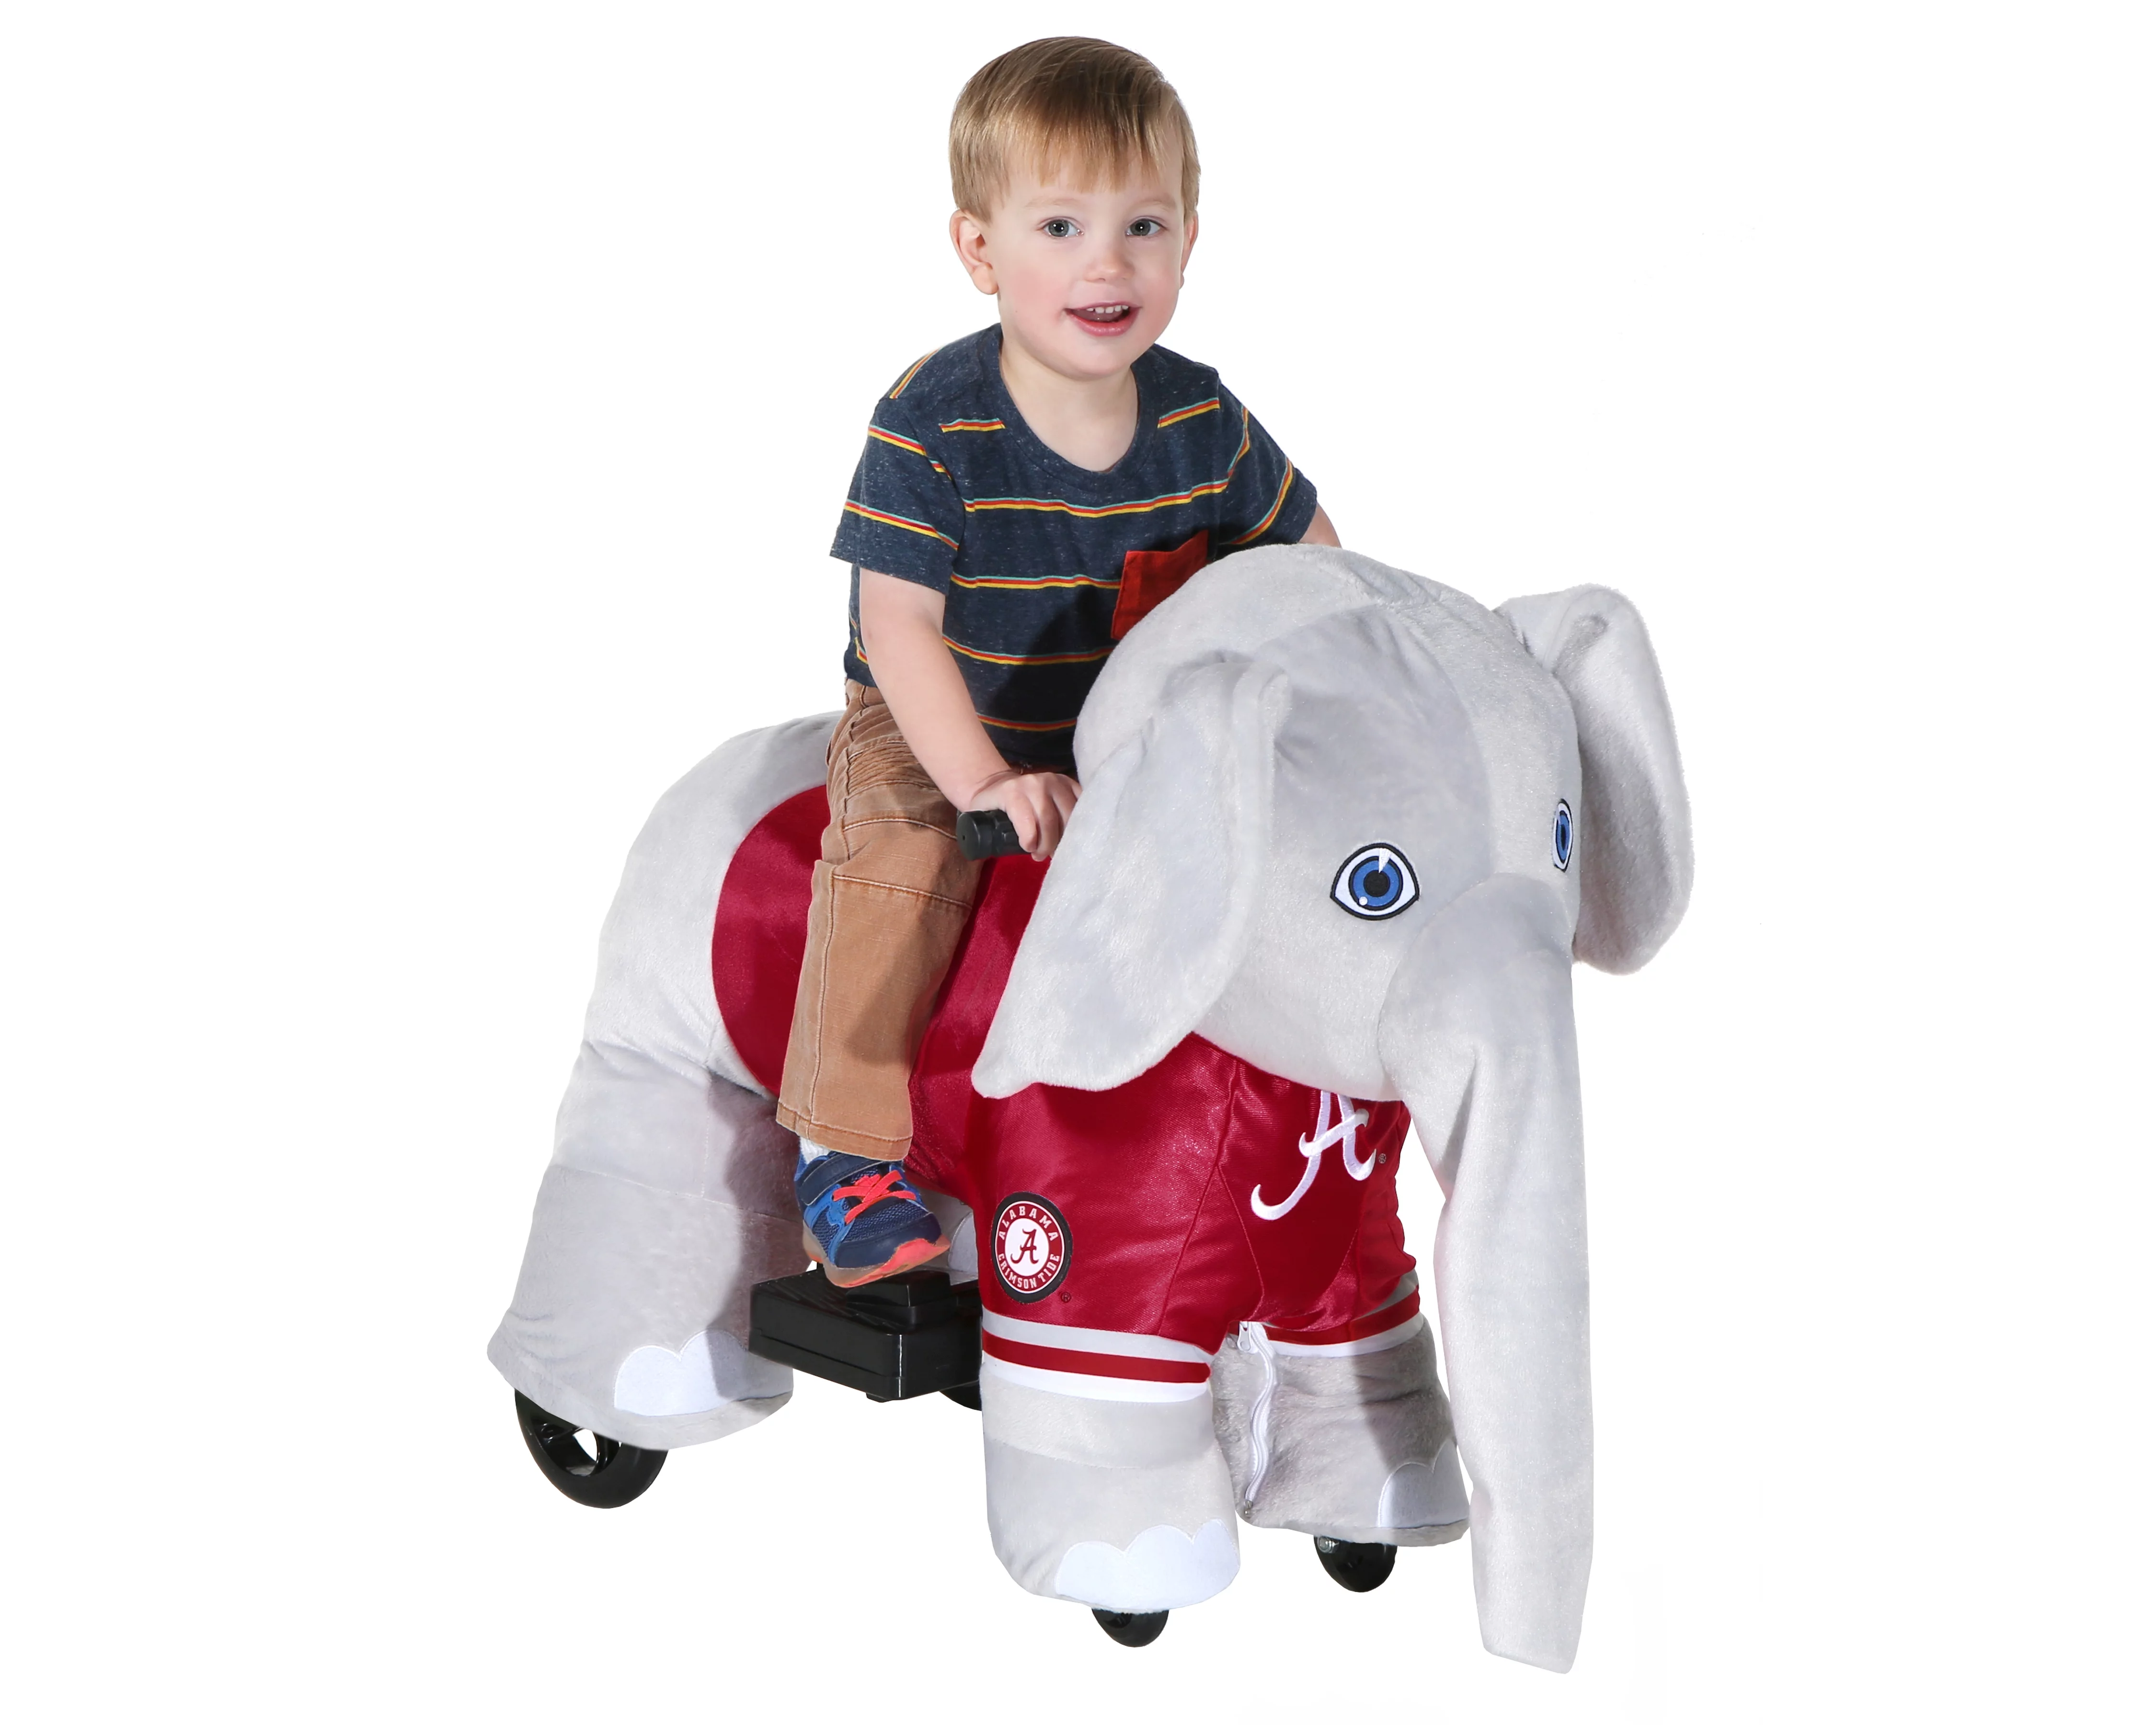 NCAA Alabama 6V Plush Ride-On with Team Bus Included!